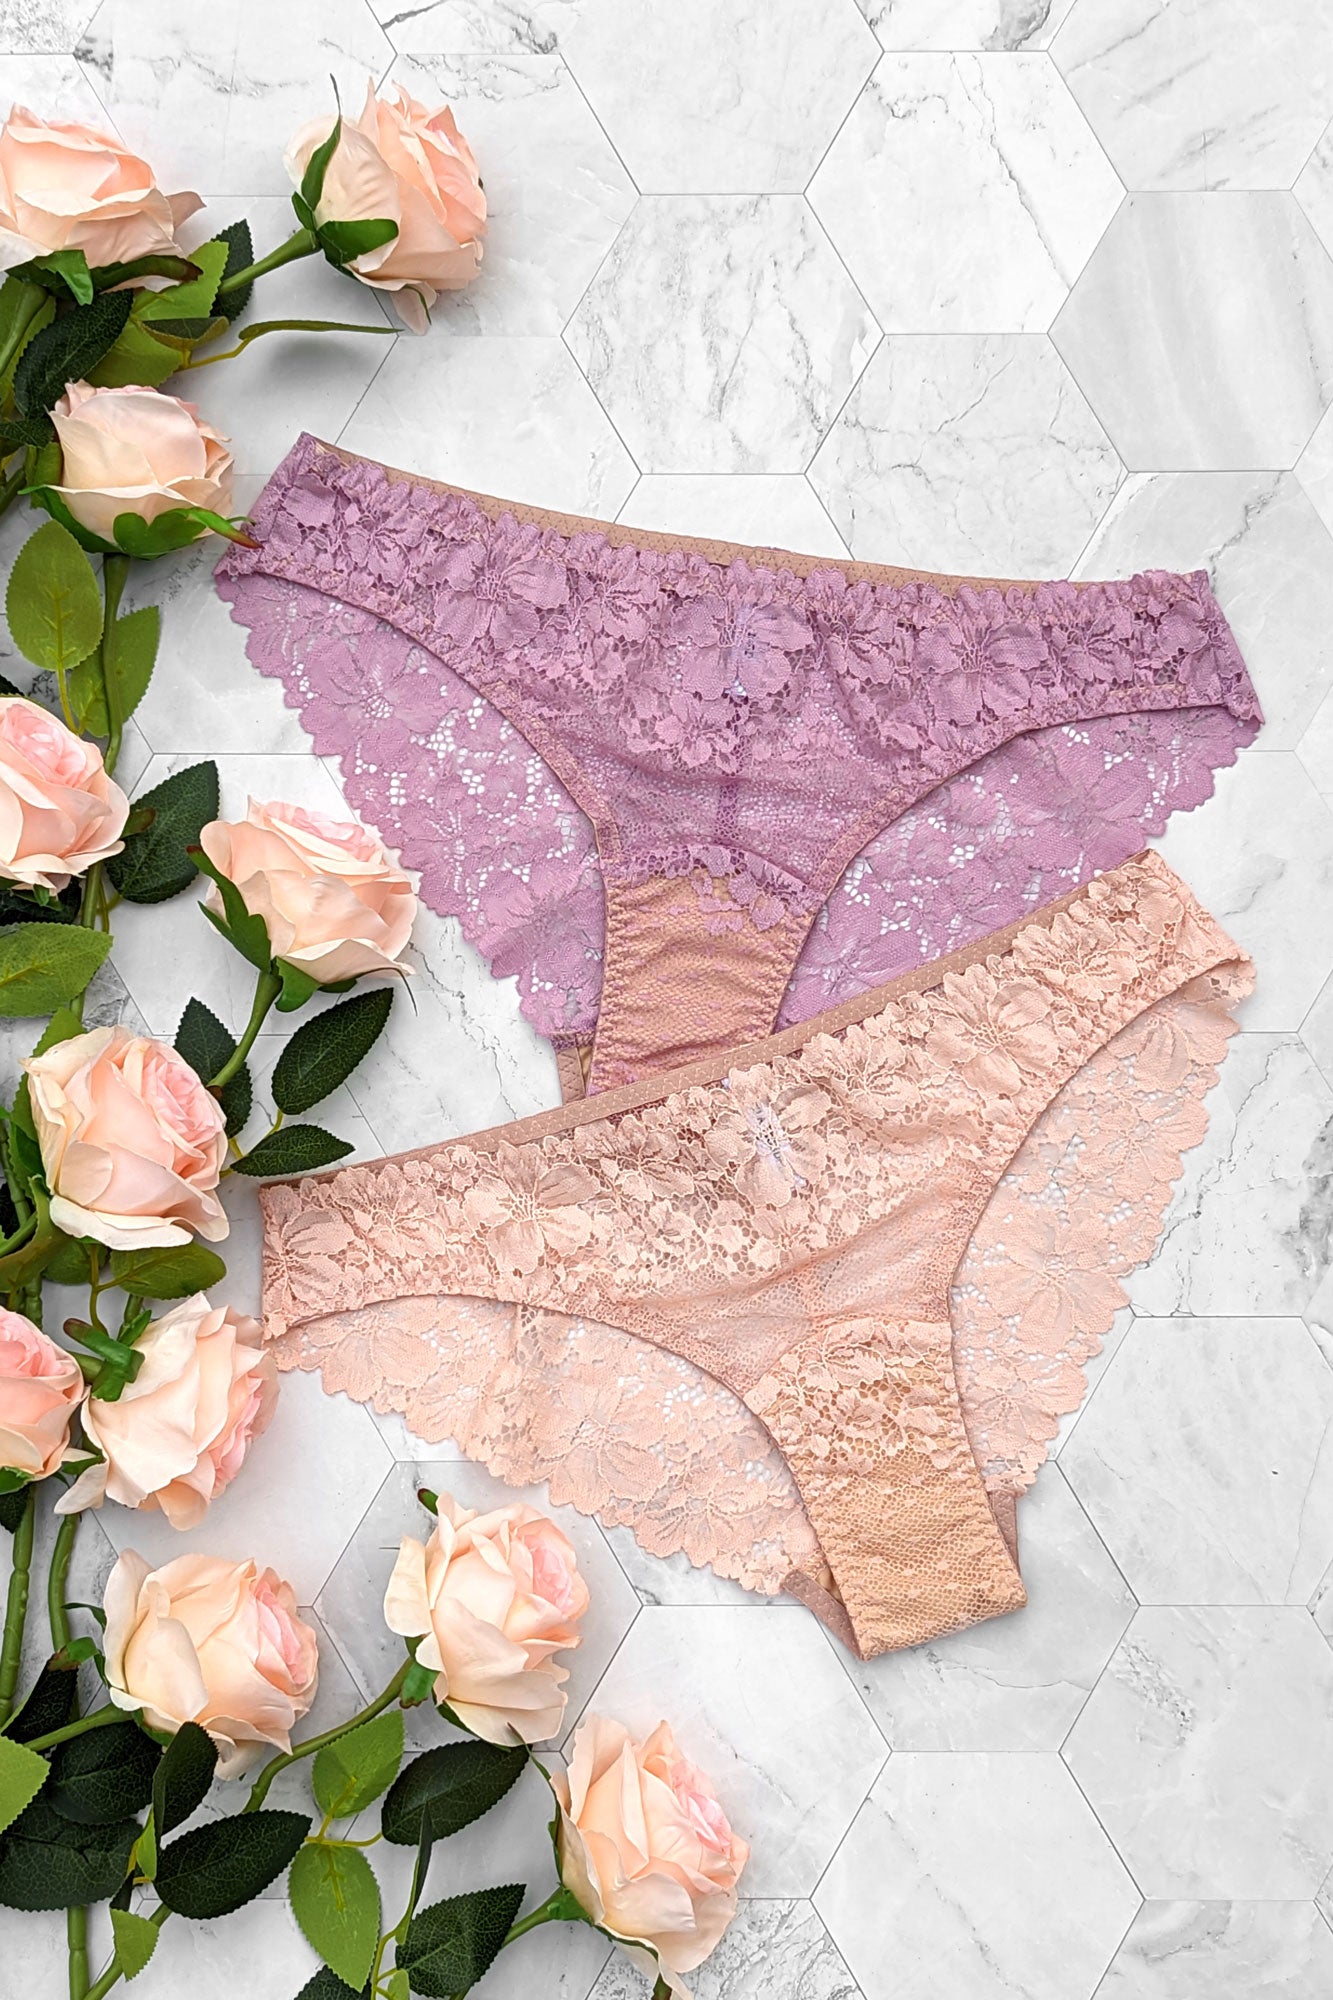 Shop for Pink, Knickers, Lingerie